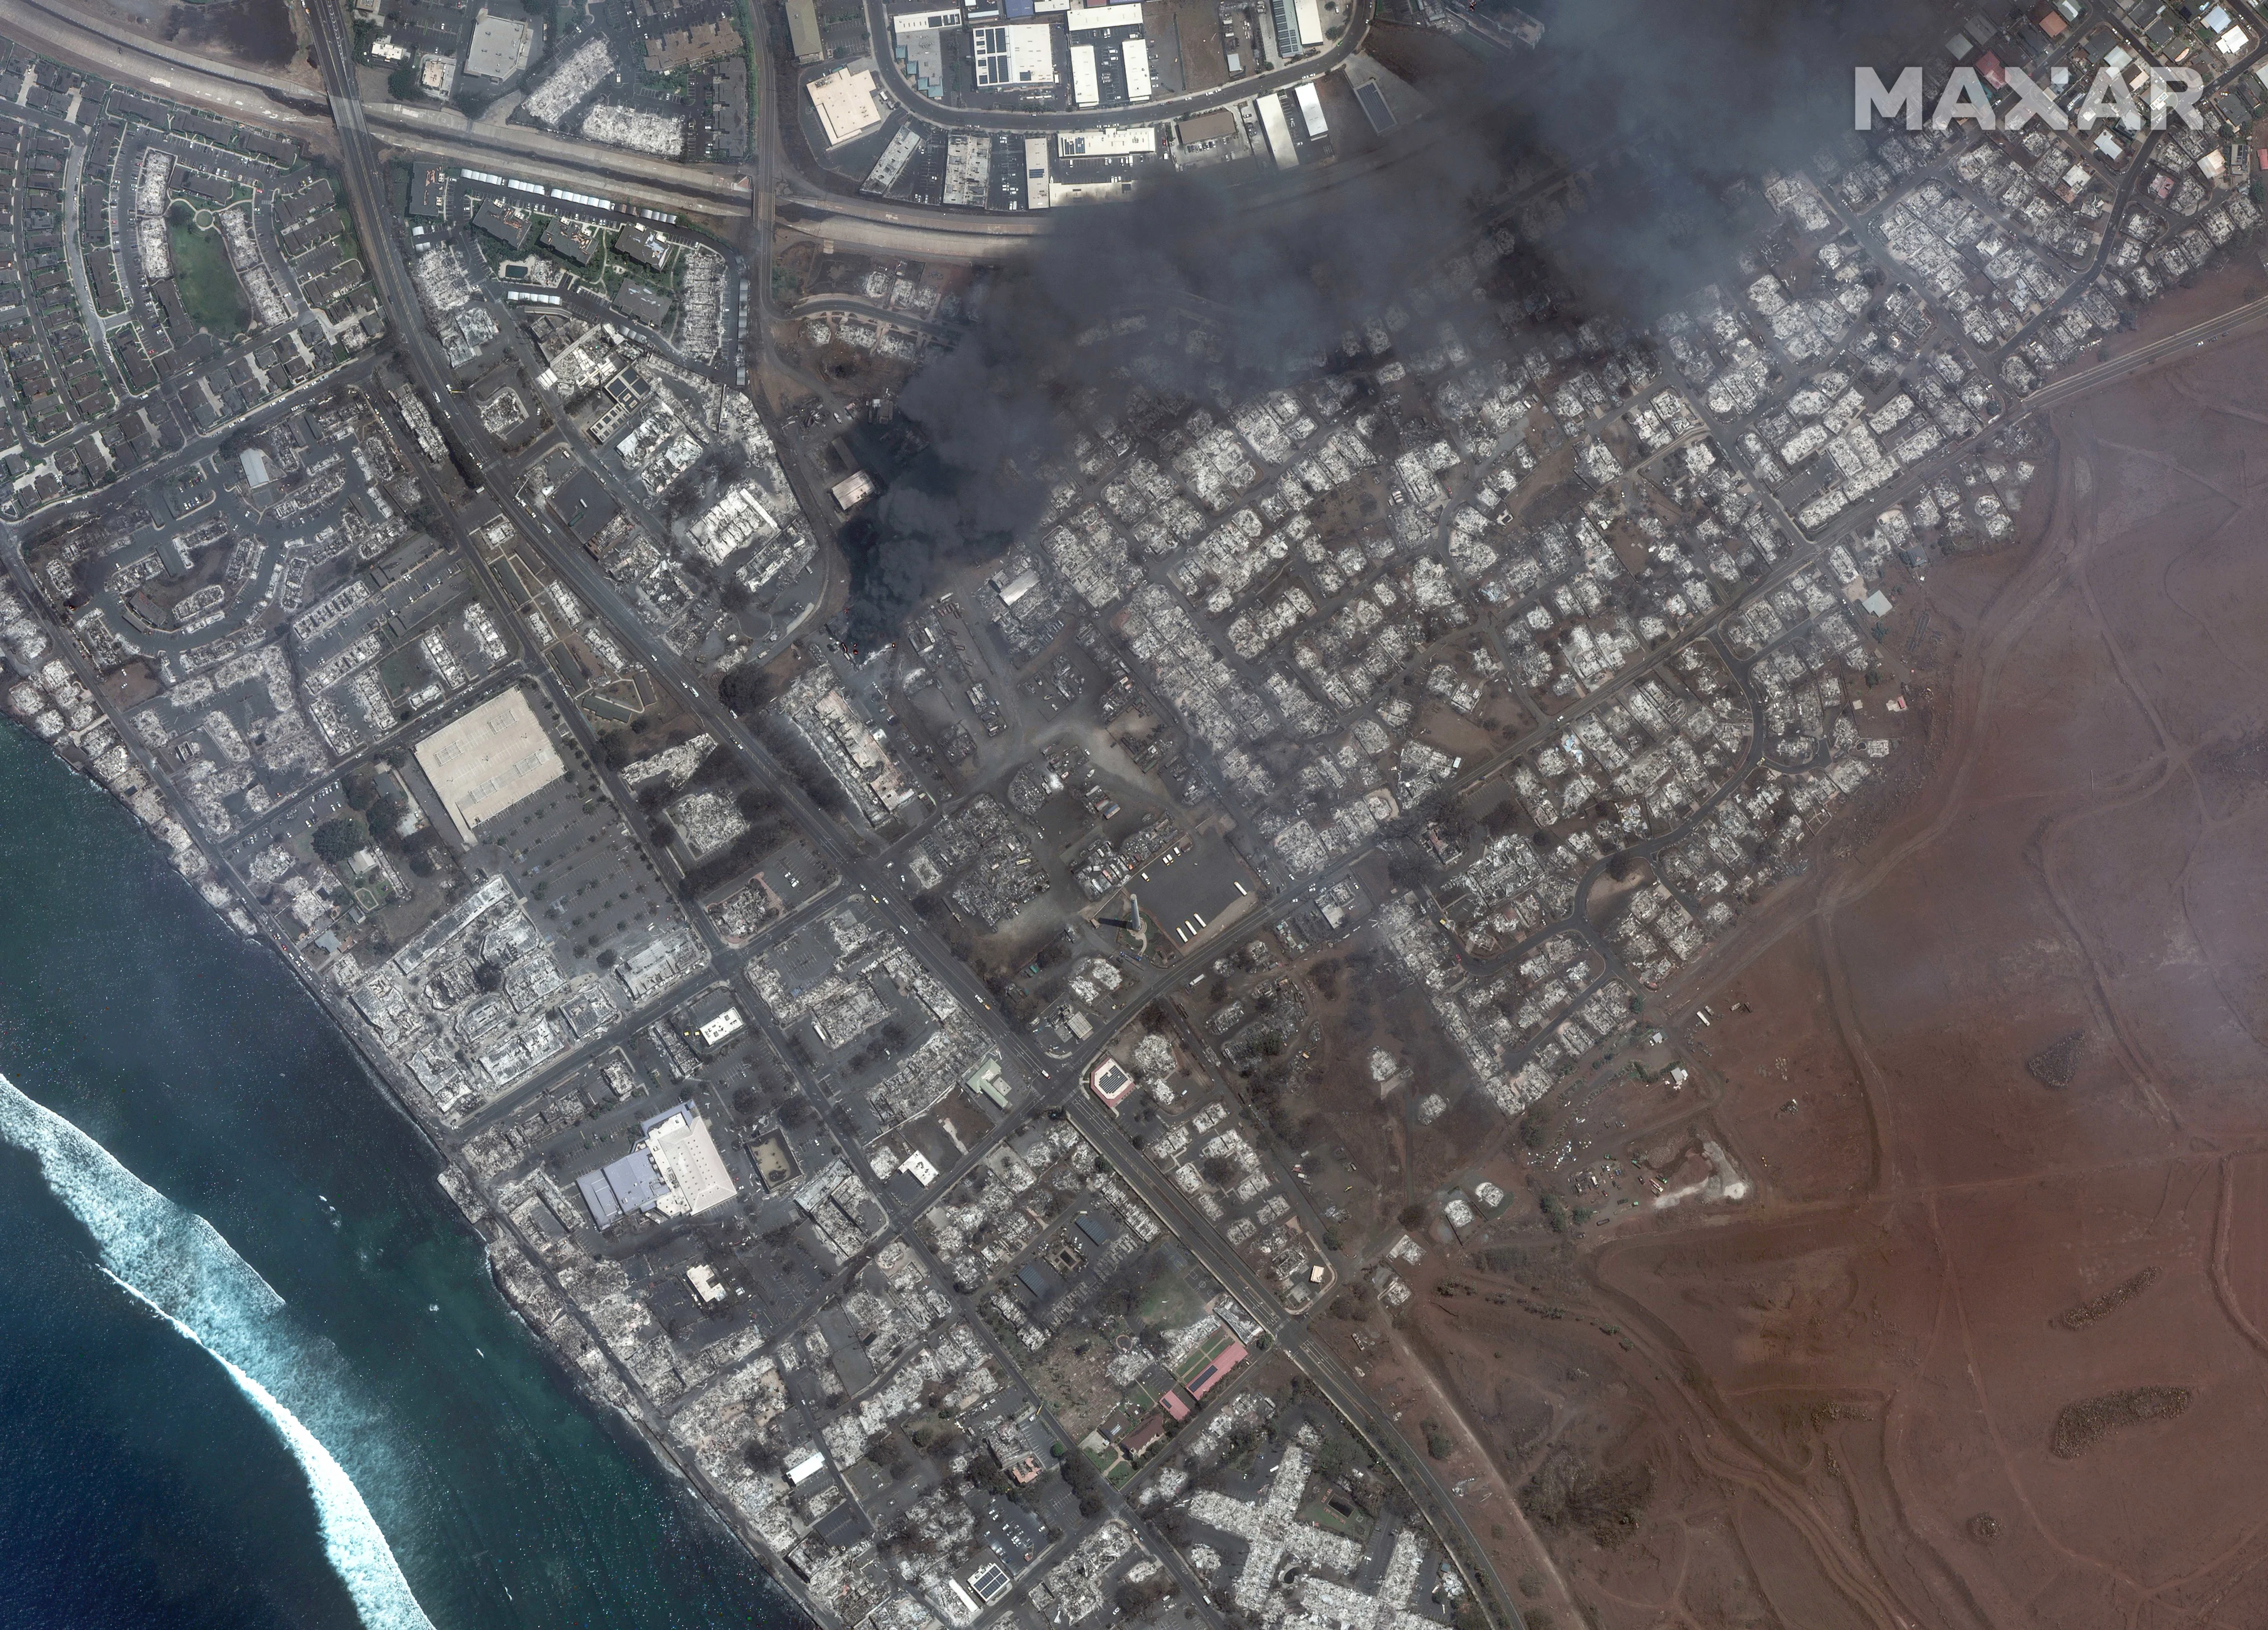 Maui’s deadly wildfires: the growing risk to communities that once seemed safe